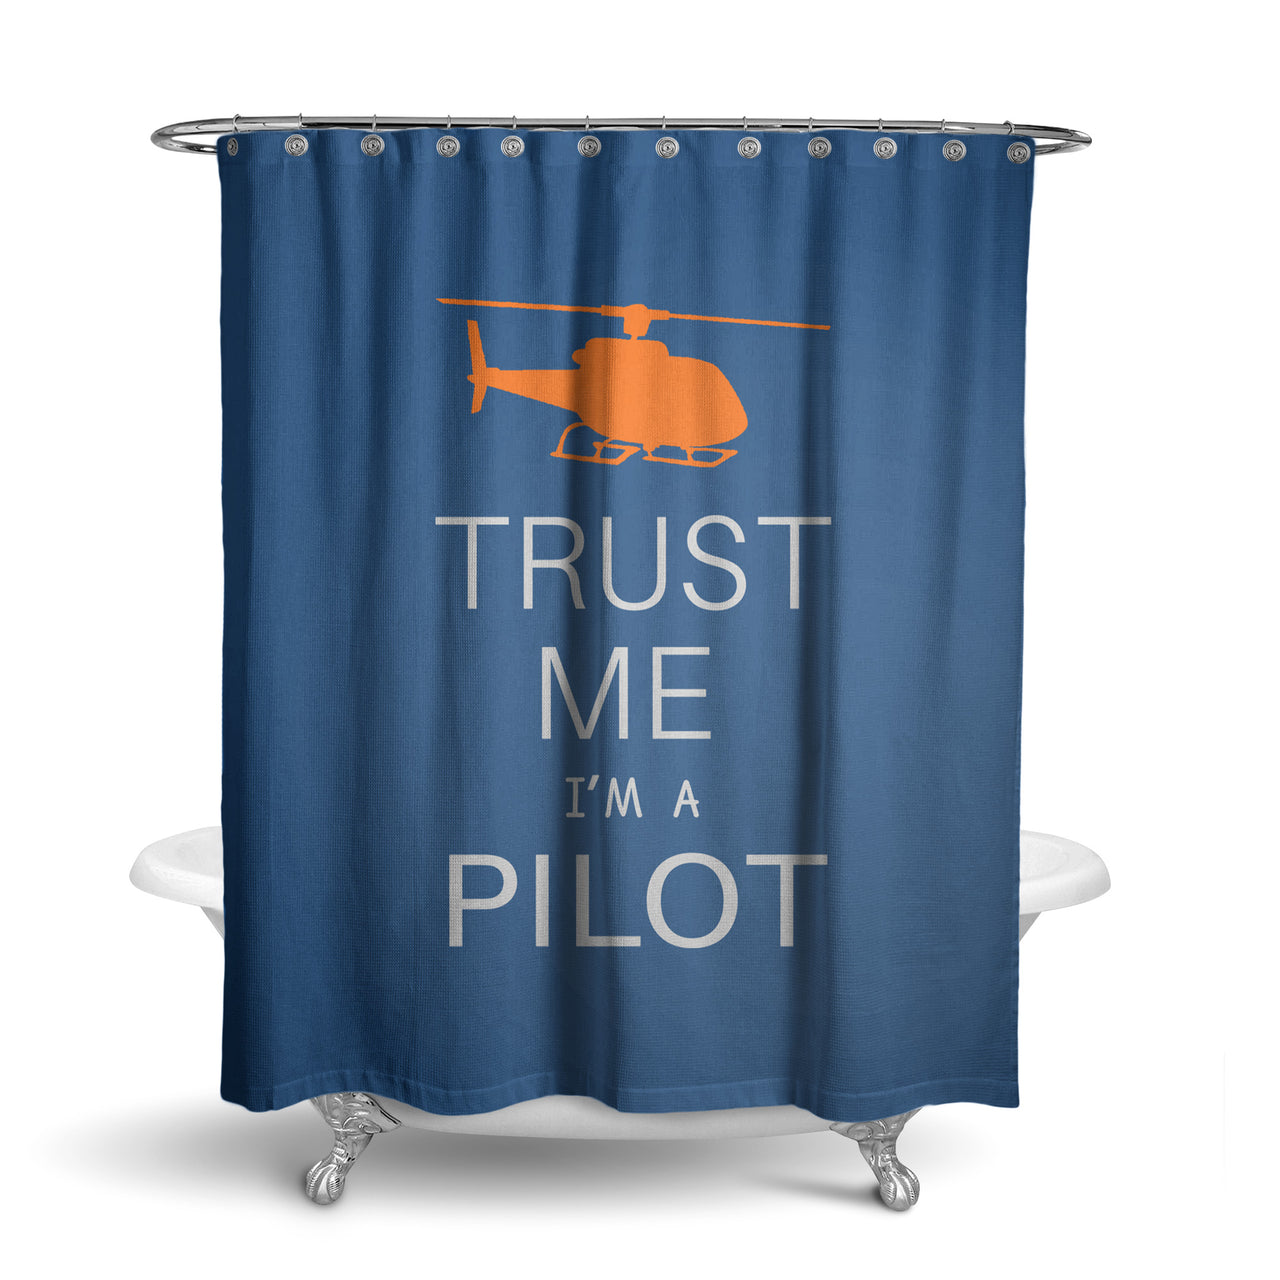 Trust Me I'm a Pilot (Helicopter) Designed Shower Curtains